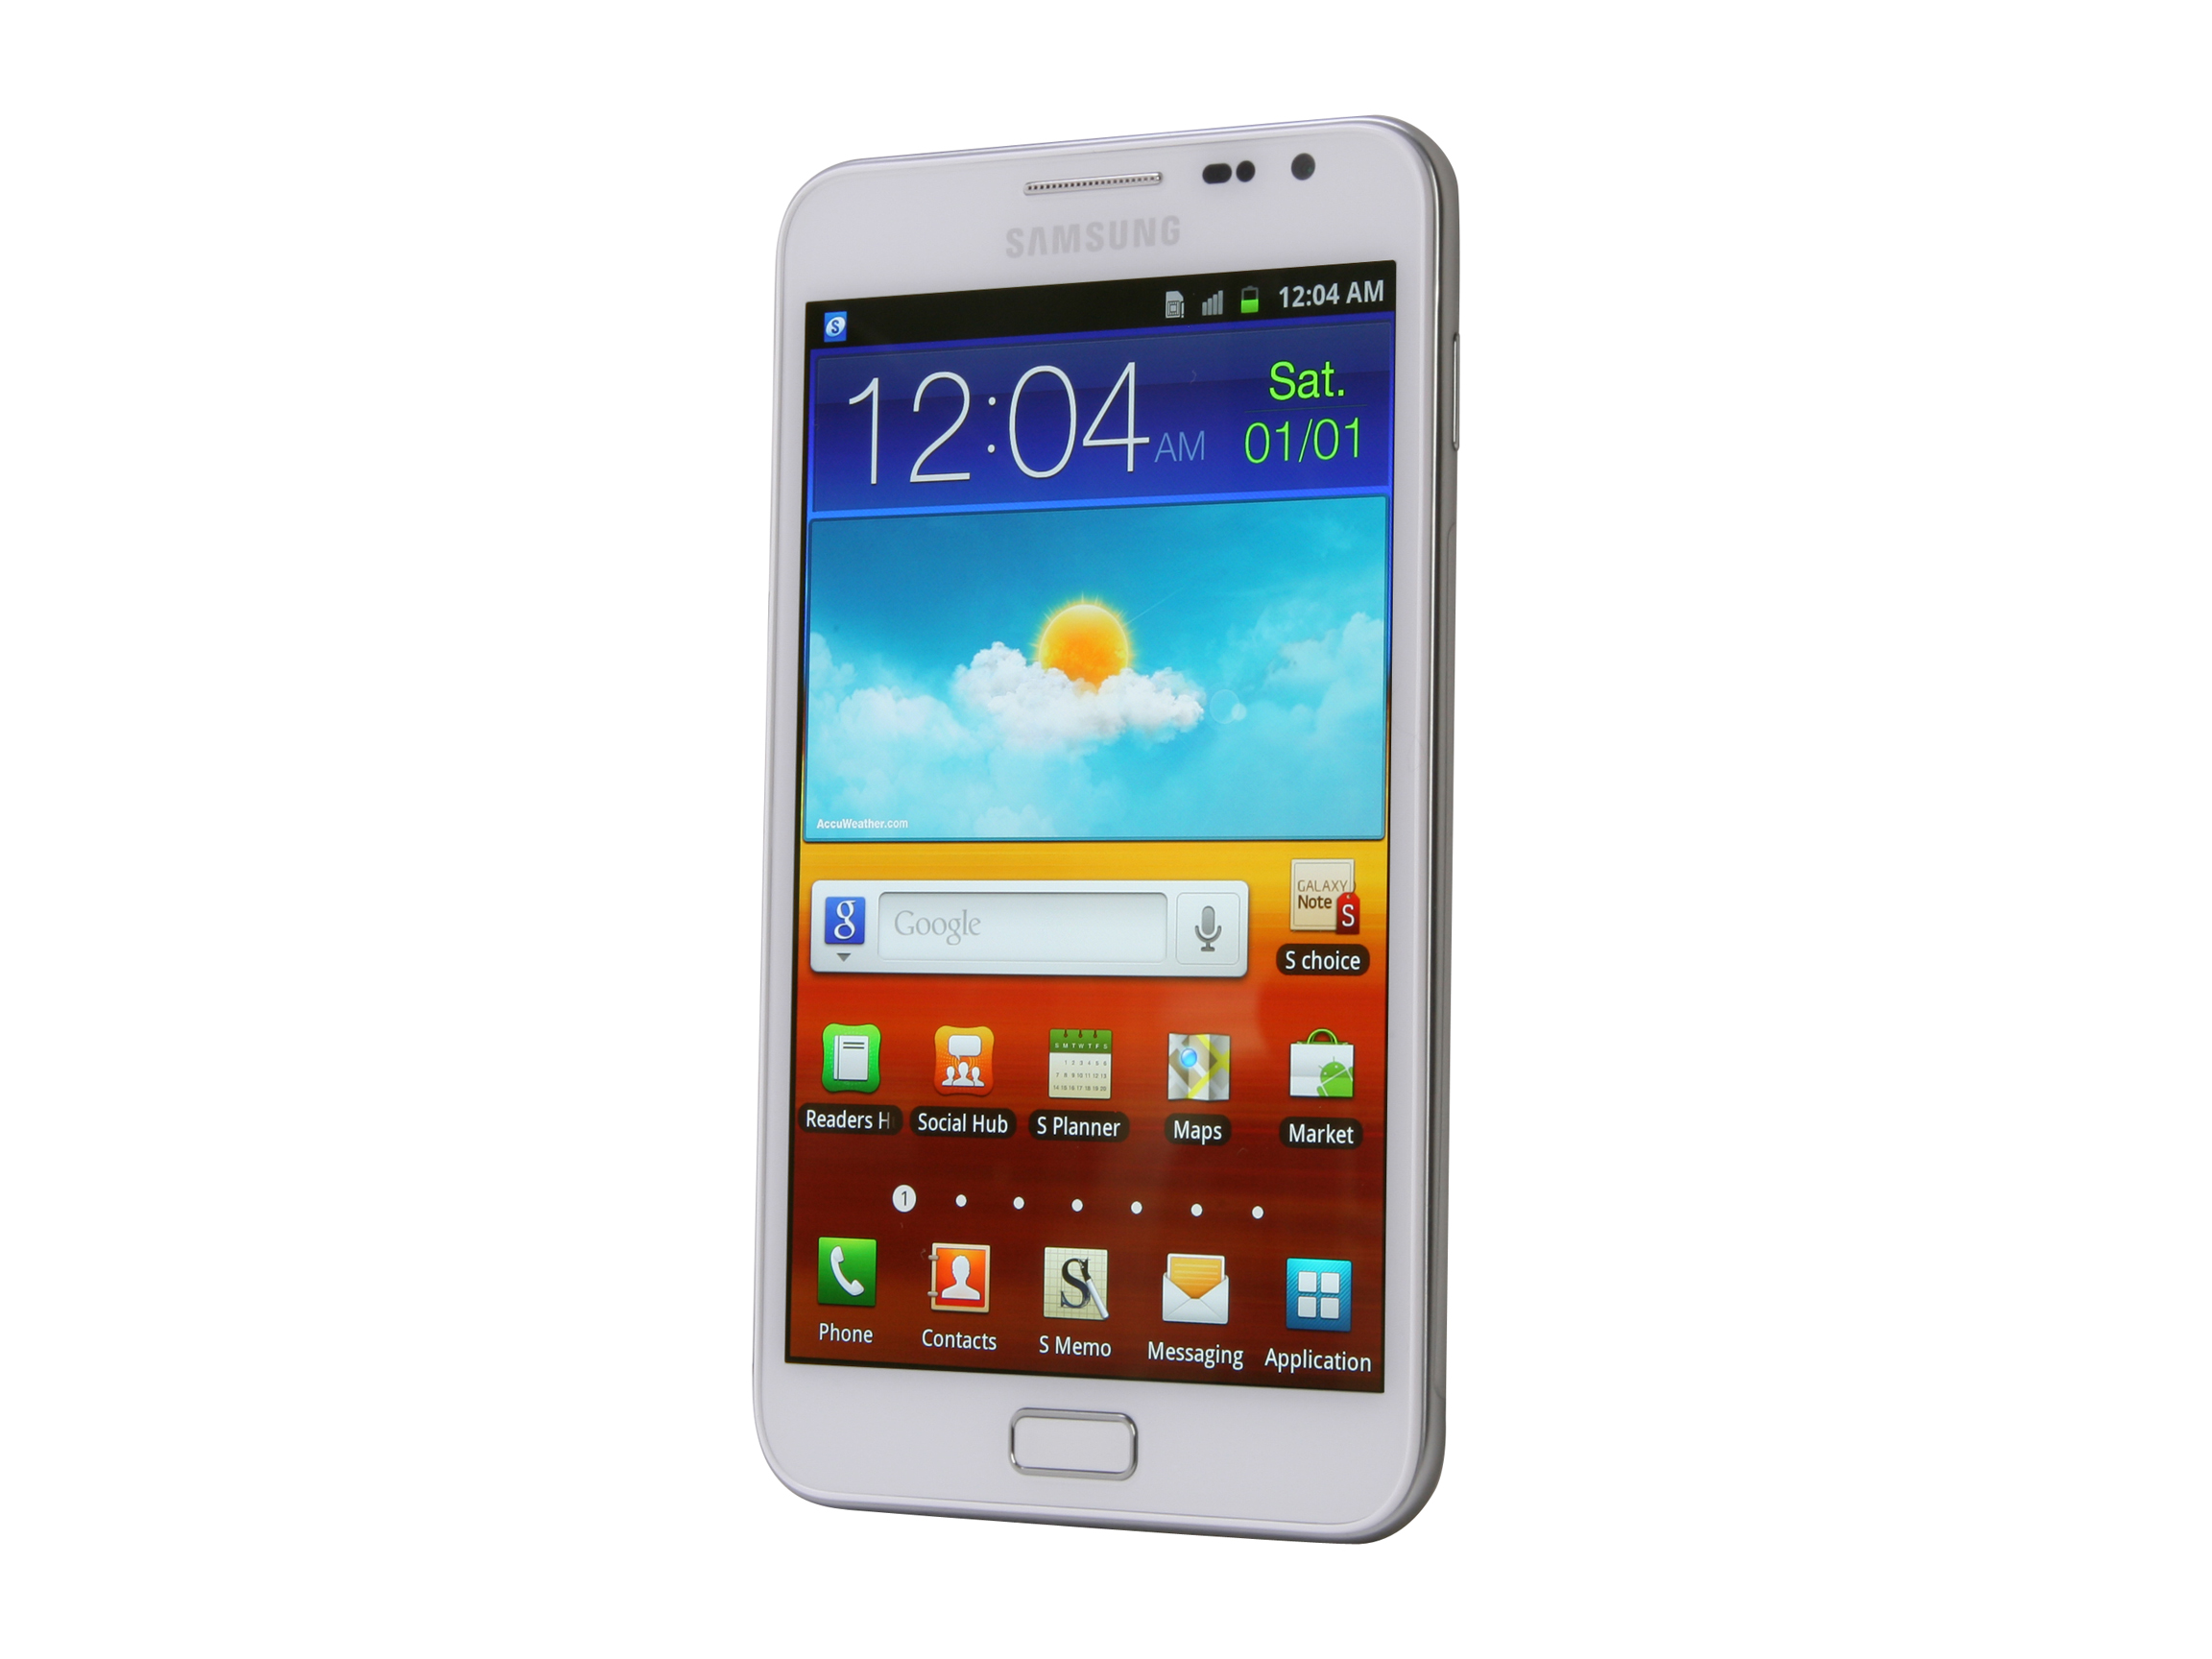 Samsung Galaxy Note 16GB White 3G Unlocked GSM Smart Phone w/ Android OS 2.3 / 8 MP Camera (N7000)